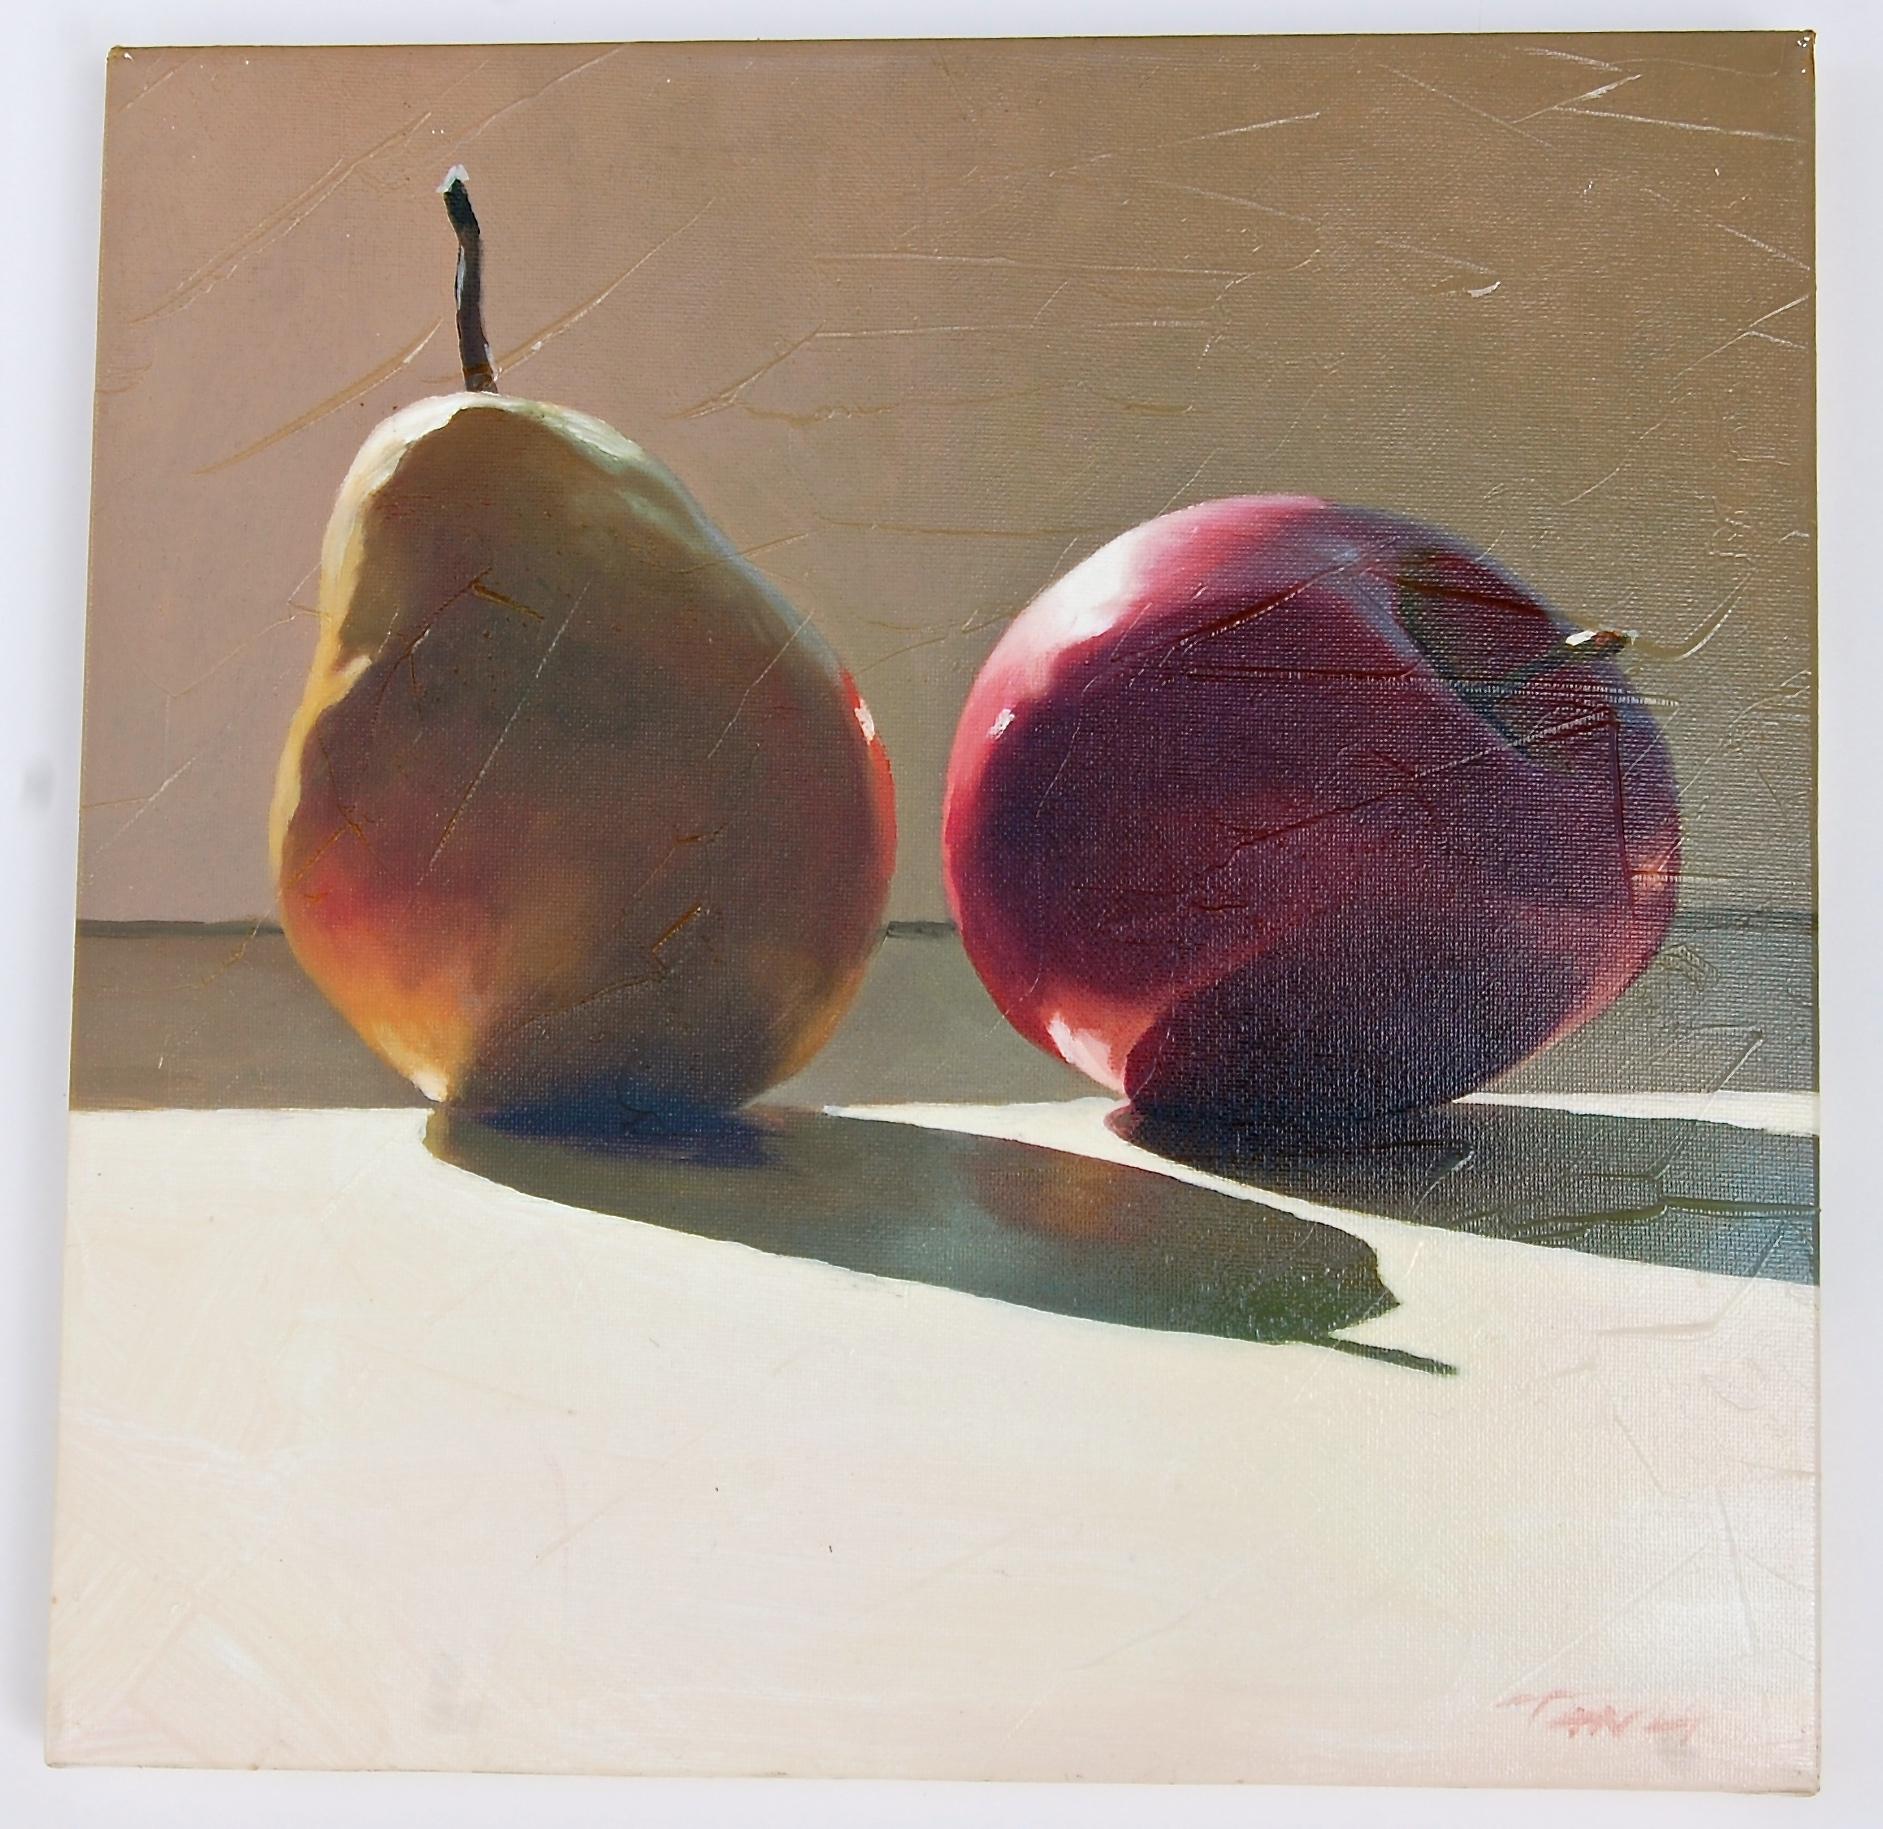 Sunbathing Still Life with Fruit - Painting by Tania Darashkevich